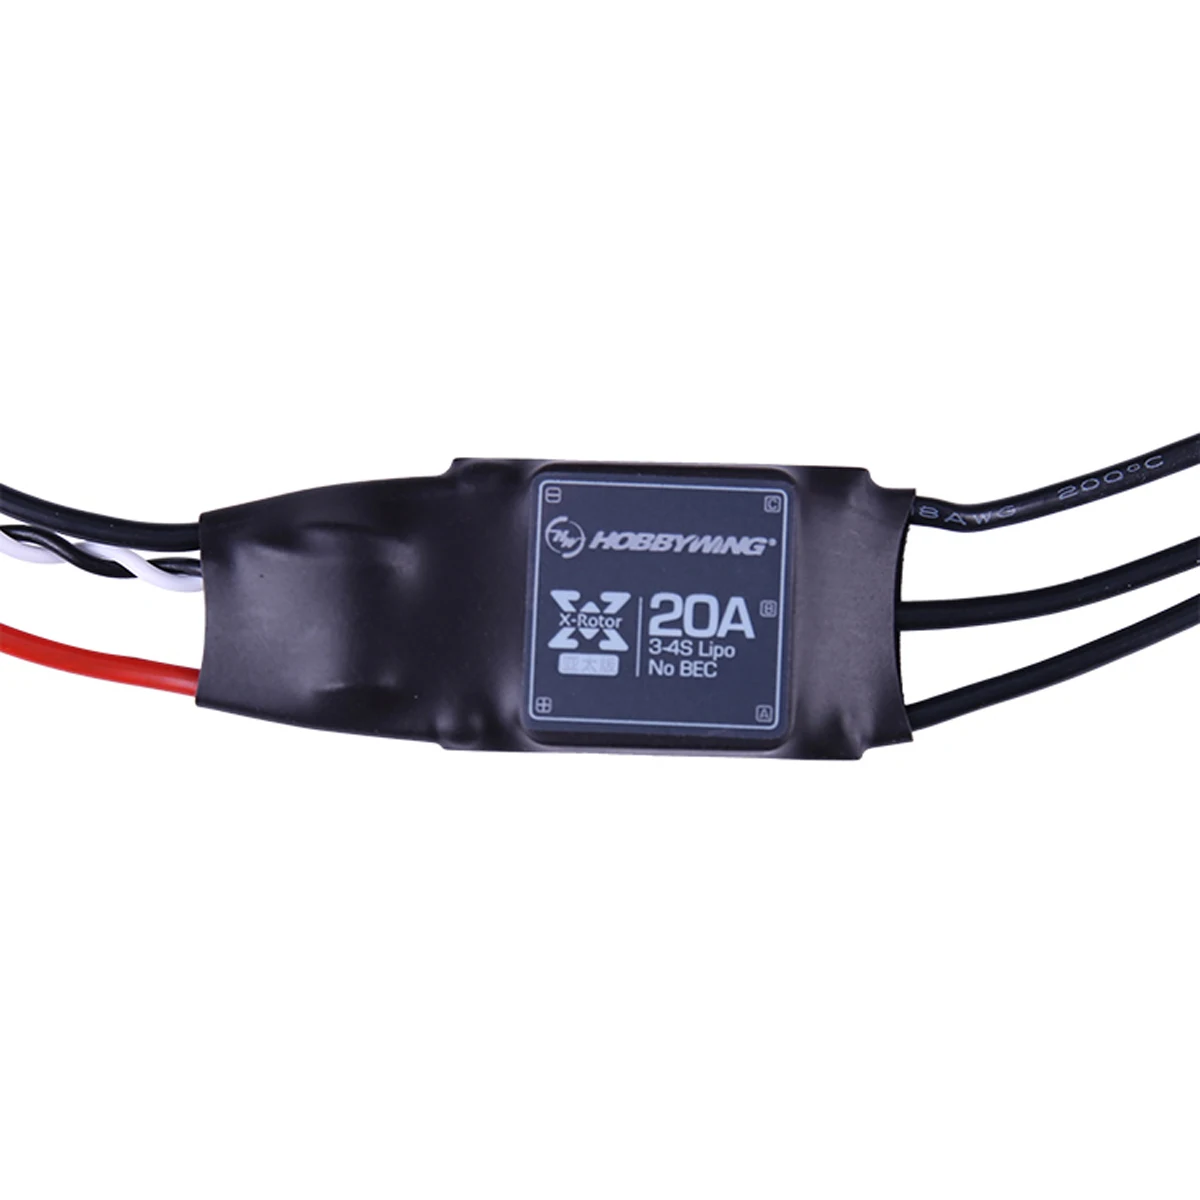 

Hobbywing XRotor 2-6S Lipo 20A Brushless ESC No BEC high refresh rate for Multi-axle aircraft copters F17544/7